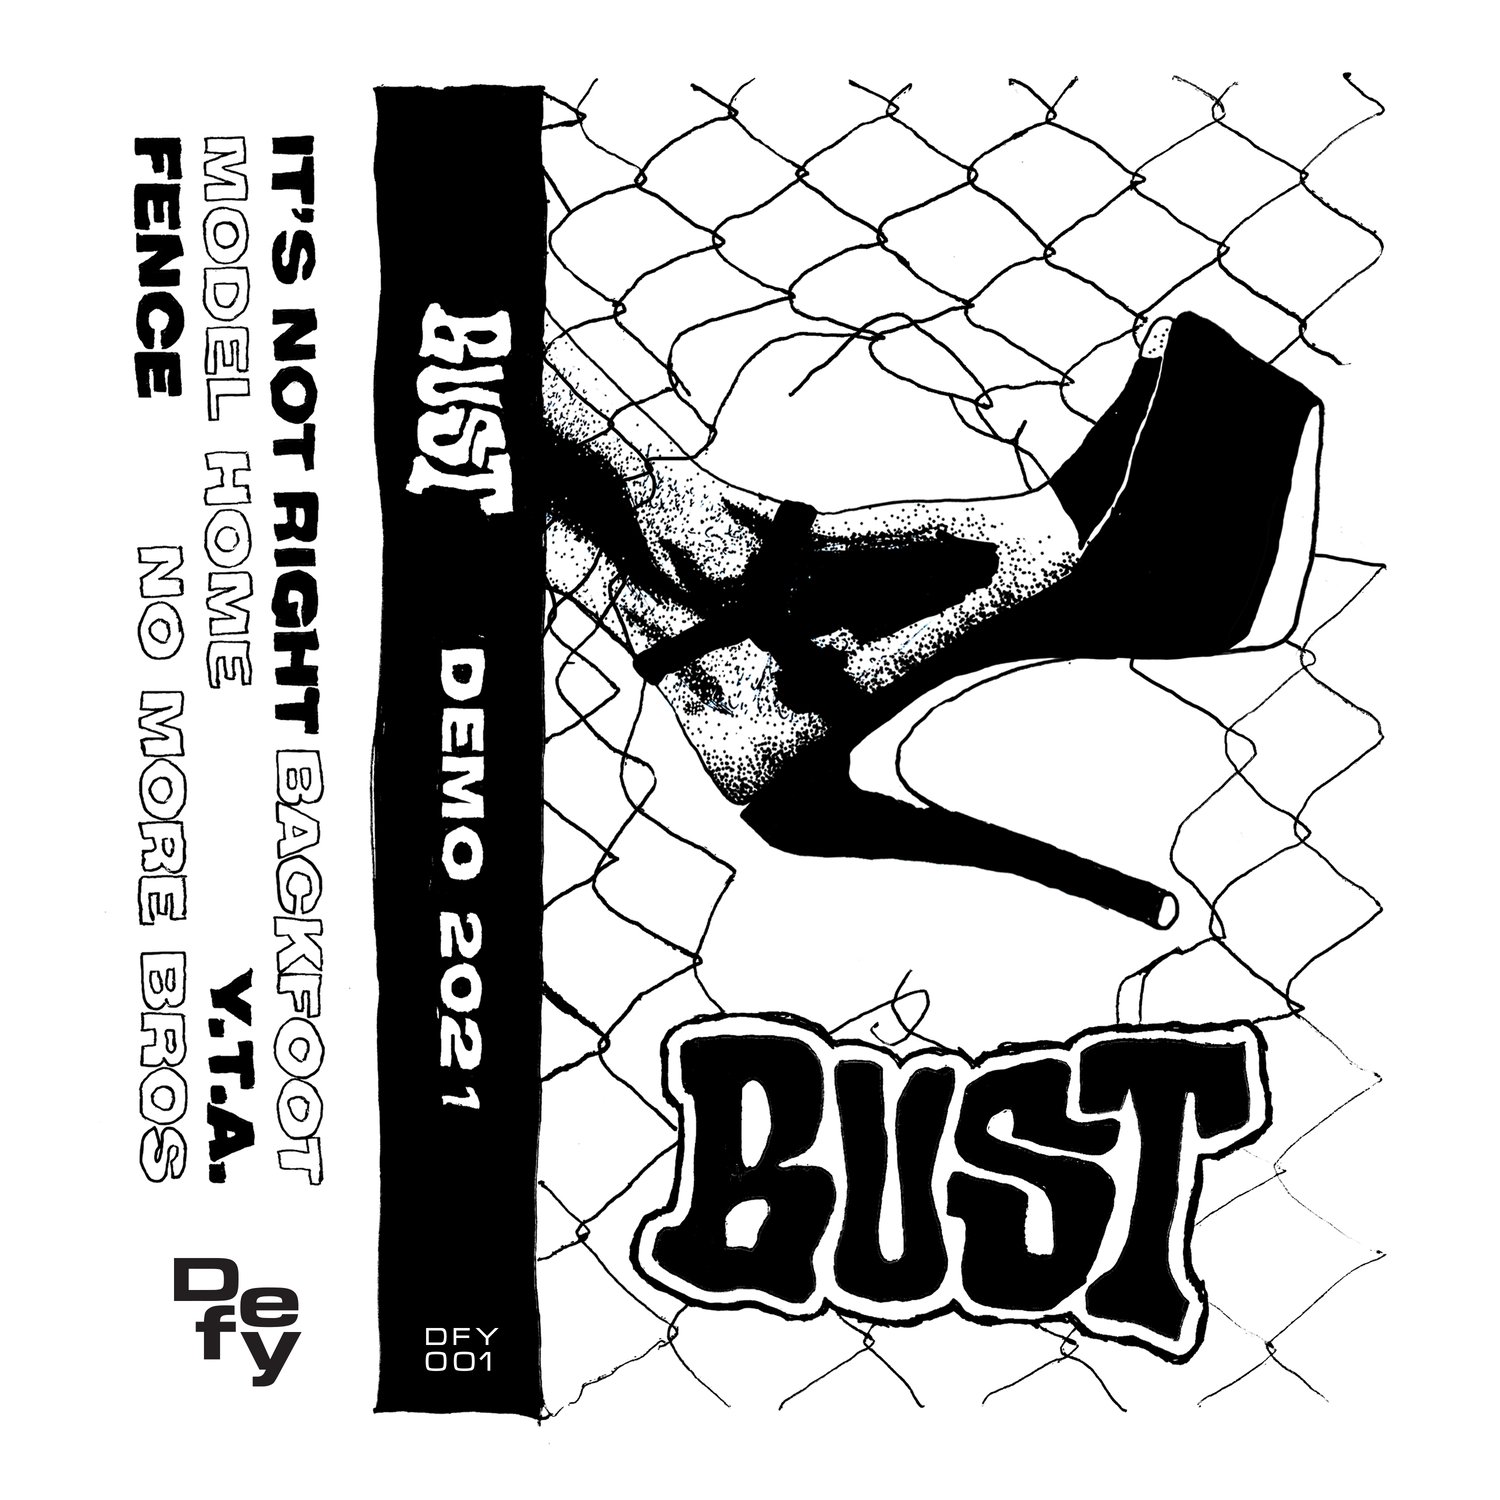 DFY001 Bust Demo 2021 Tape